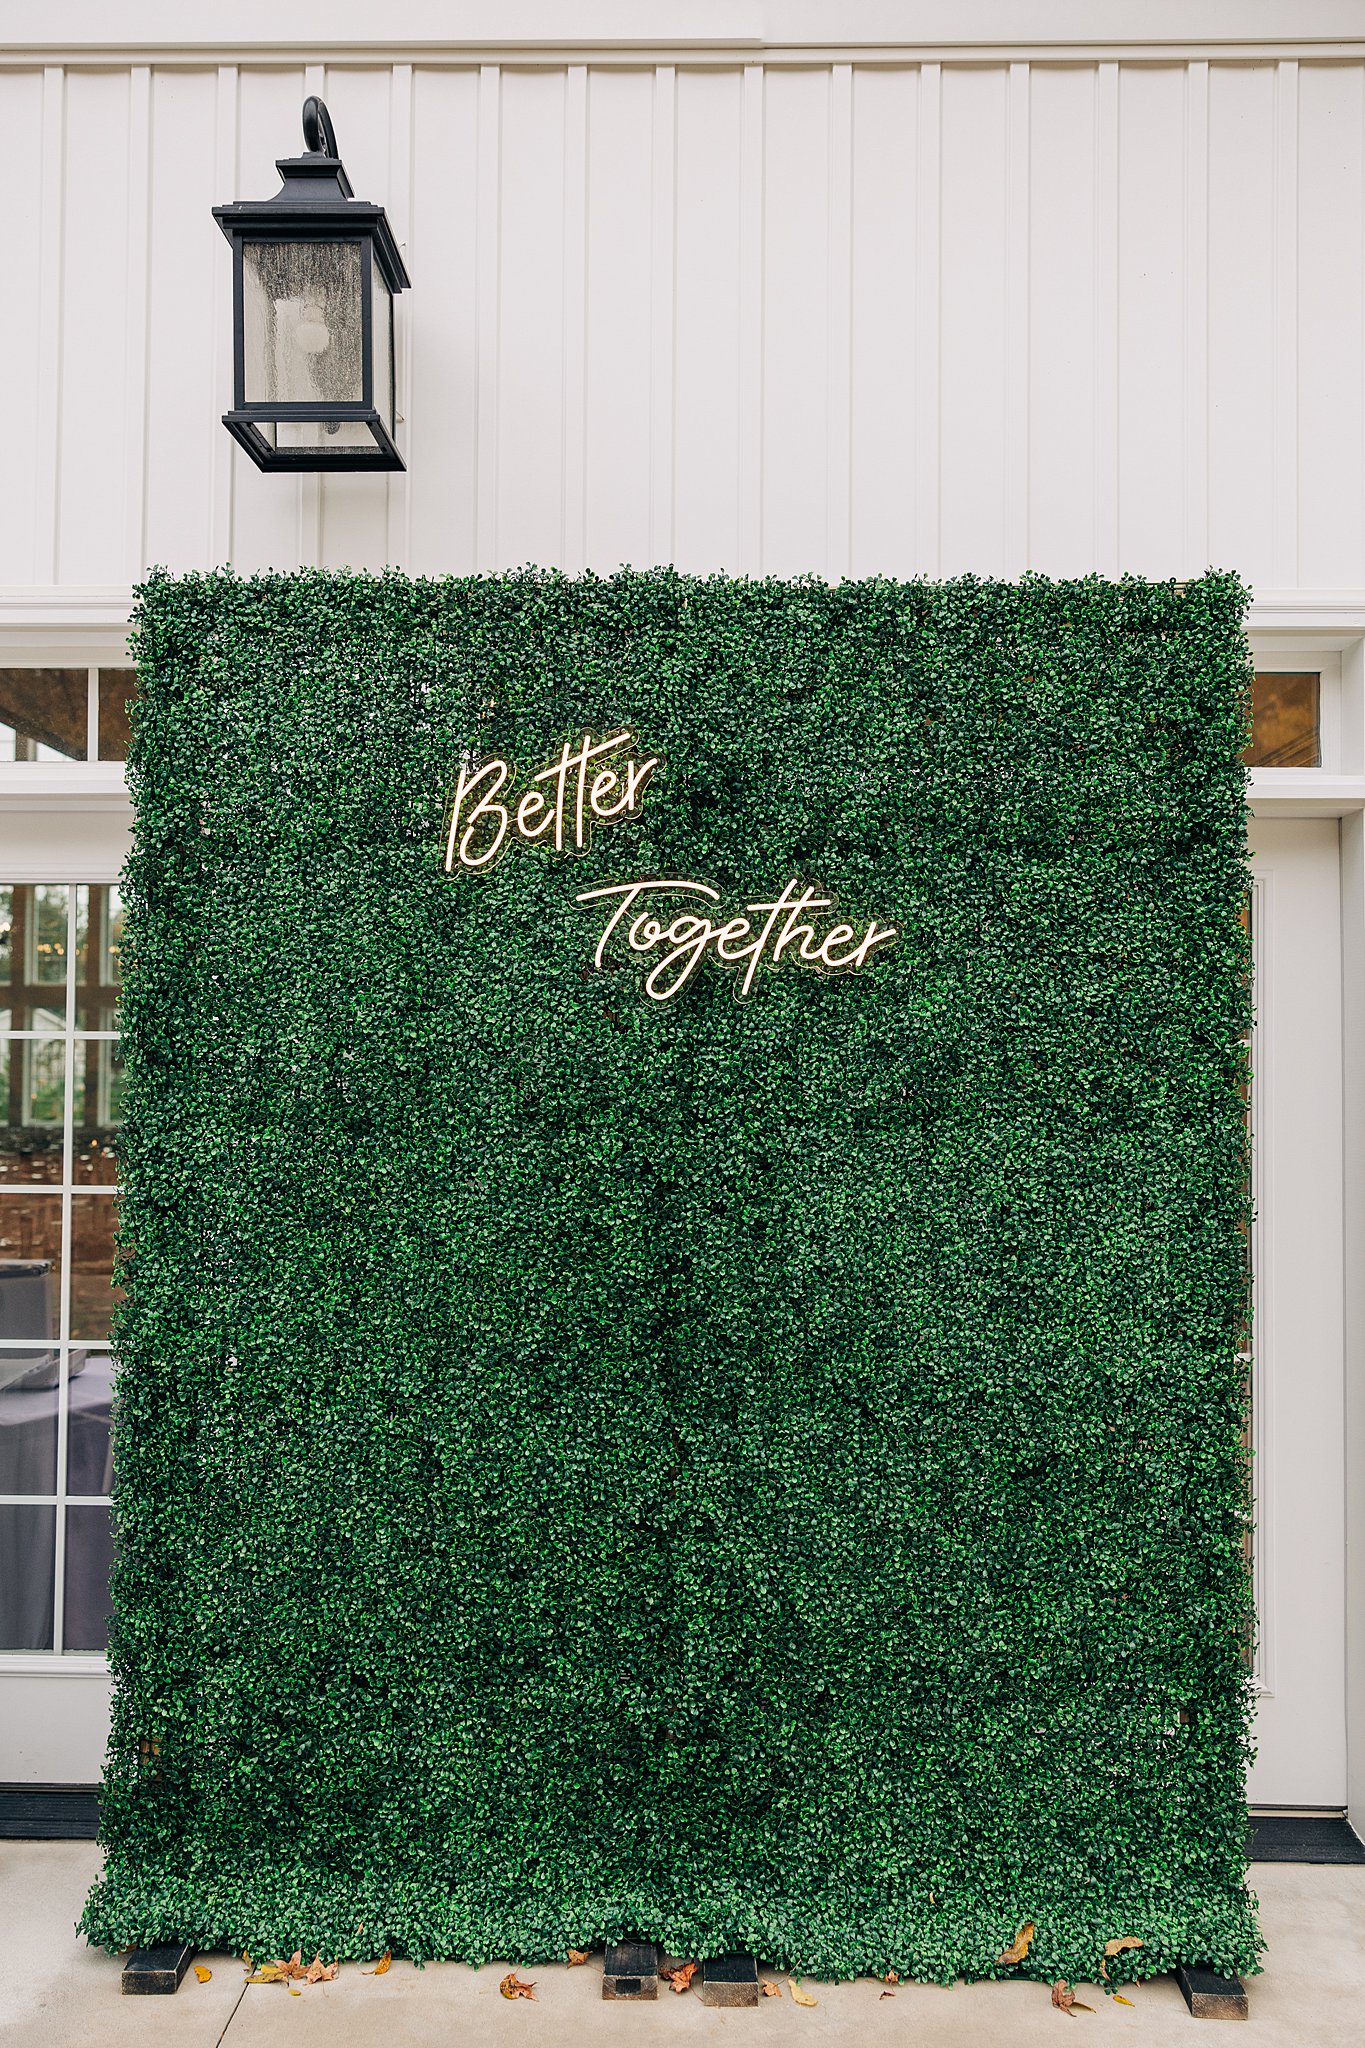 A greenery wall with an LED sign built into it outside a wedding venue